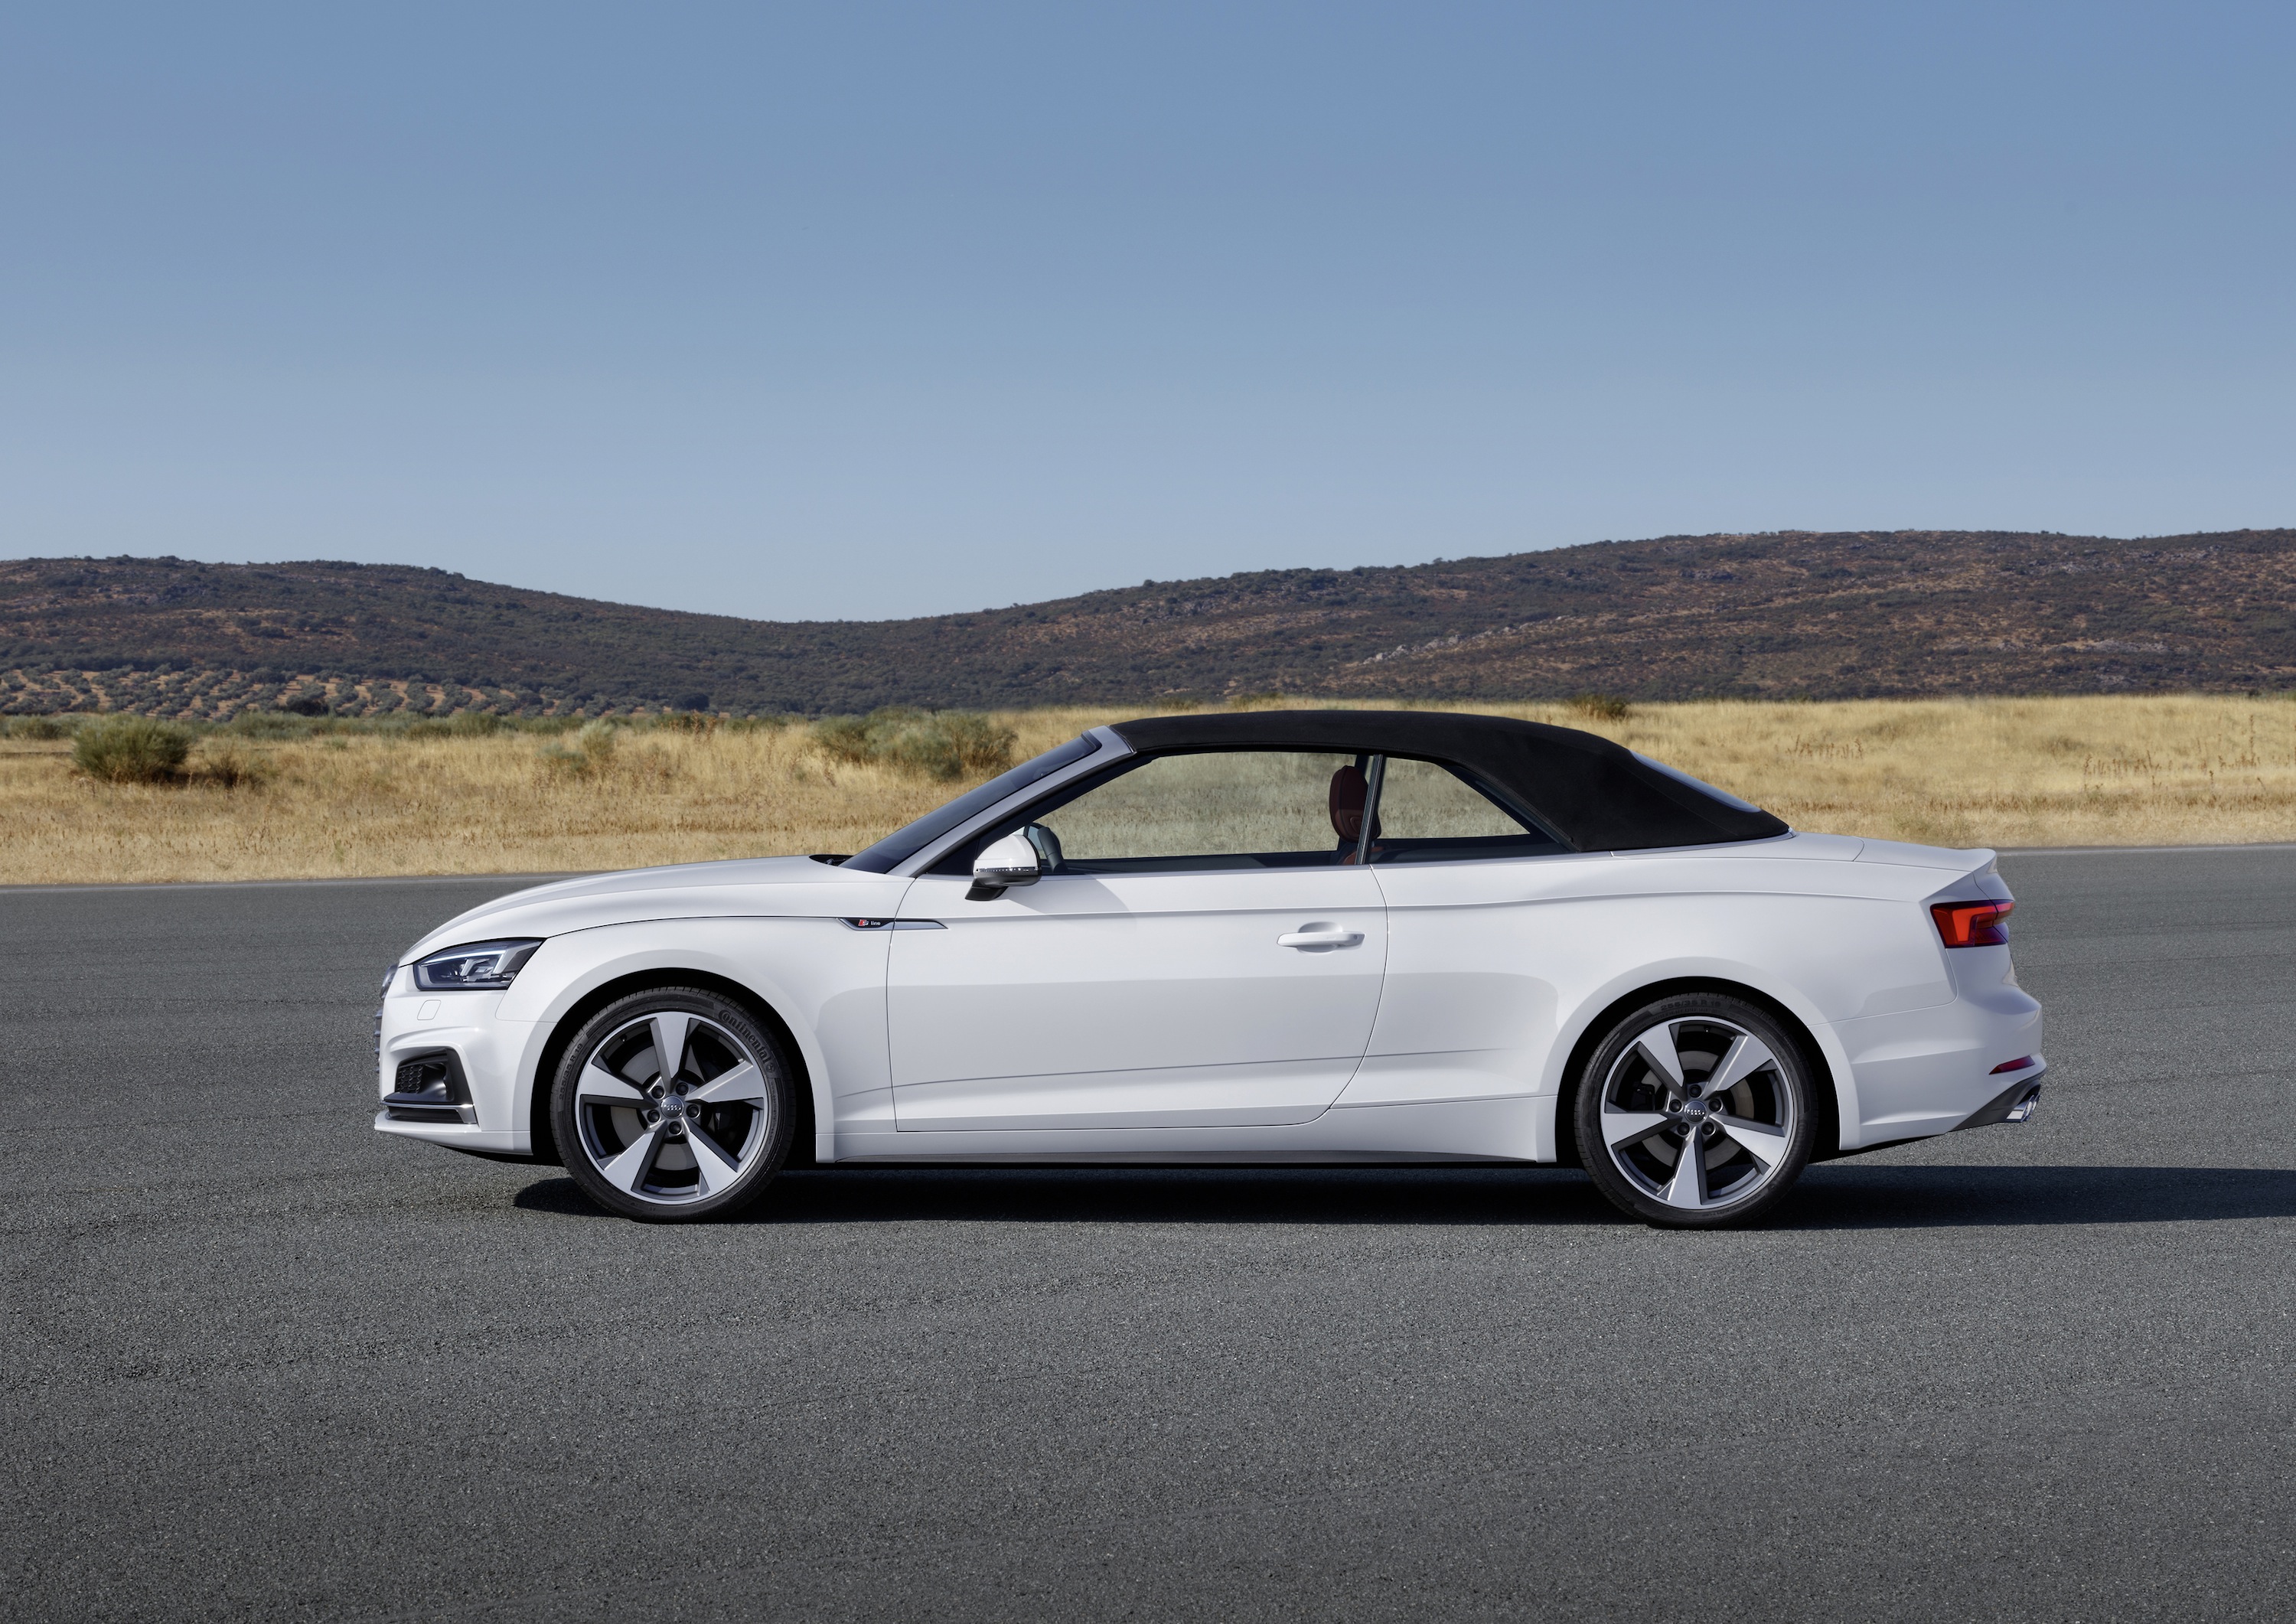 Audi A5 Cabriolet accessories restyling